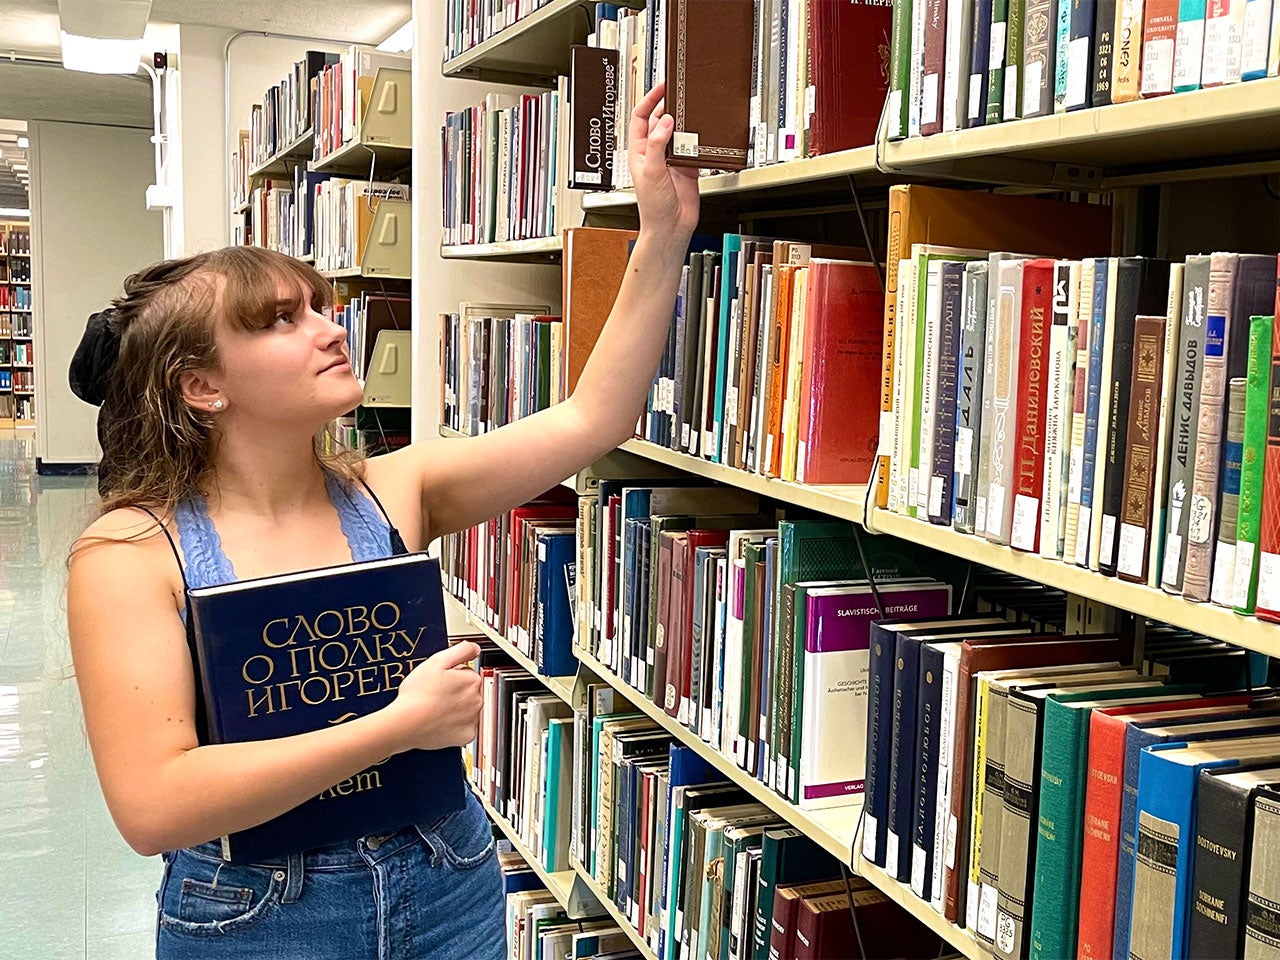 A shelf in Peter J. Shields Library displaying books with titles printed in Cyrillic. UC Davis Russian minor Ryleigh Praker reaches for a book while holding a blue book with a Russian title.